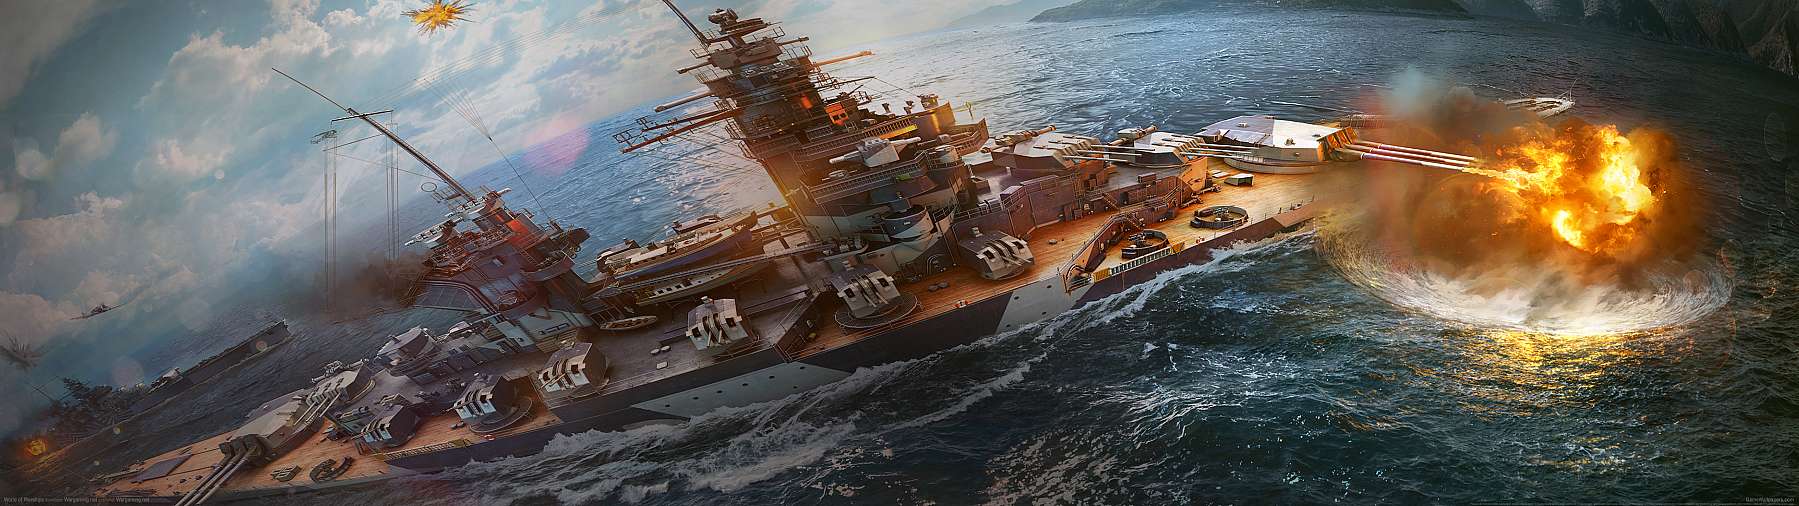 World of Warships superwide fond d'cran 27